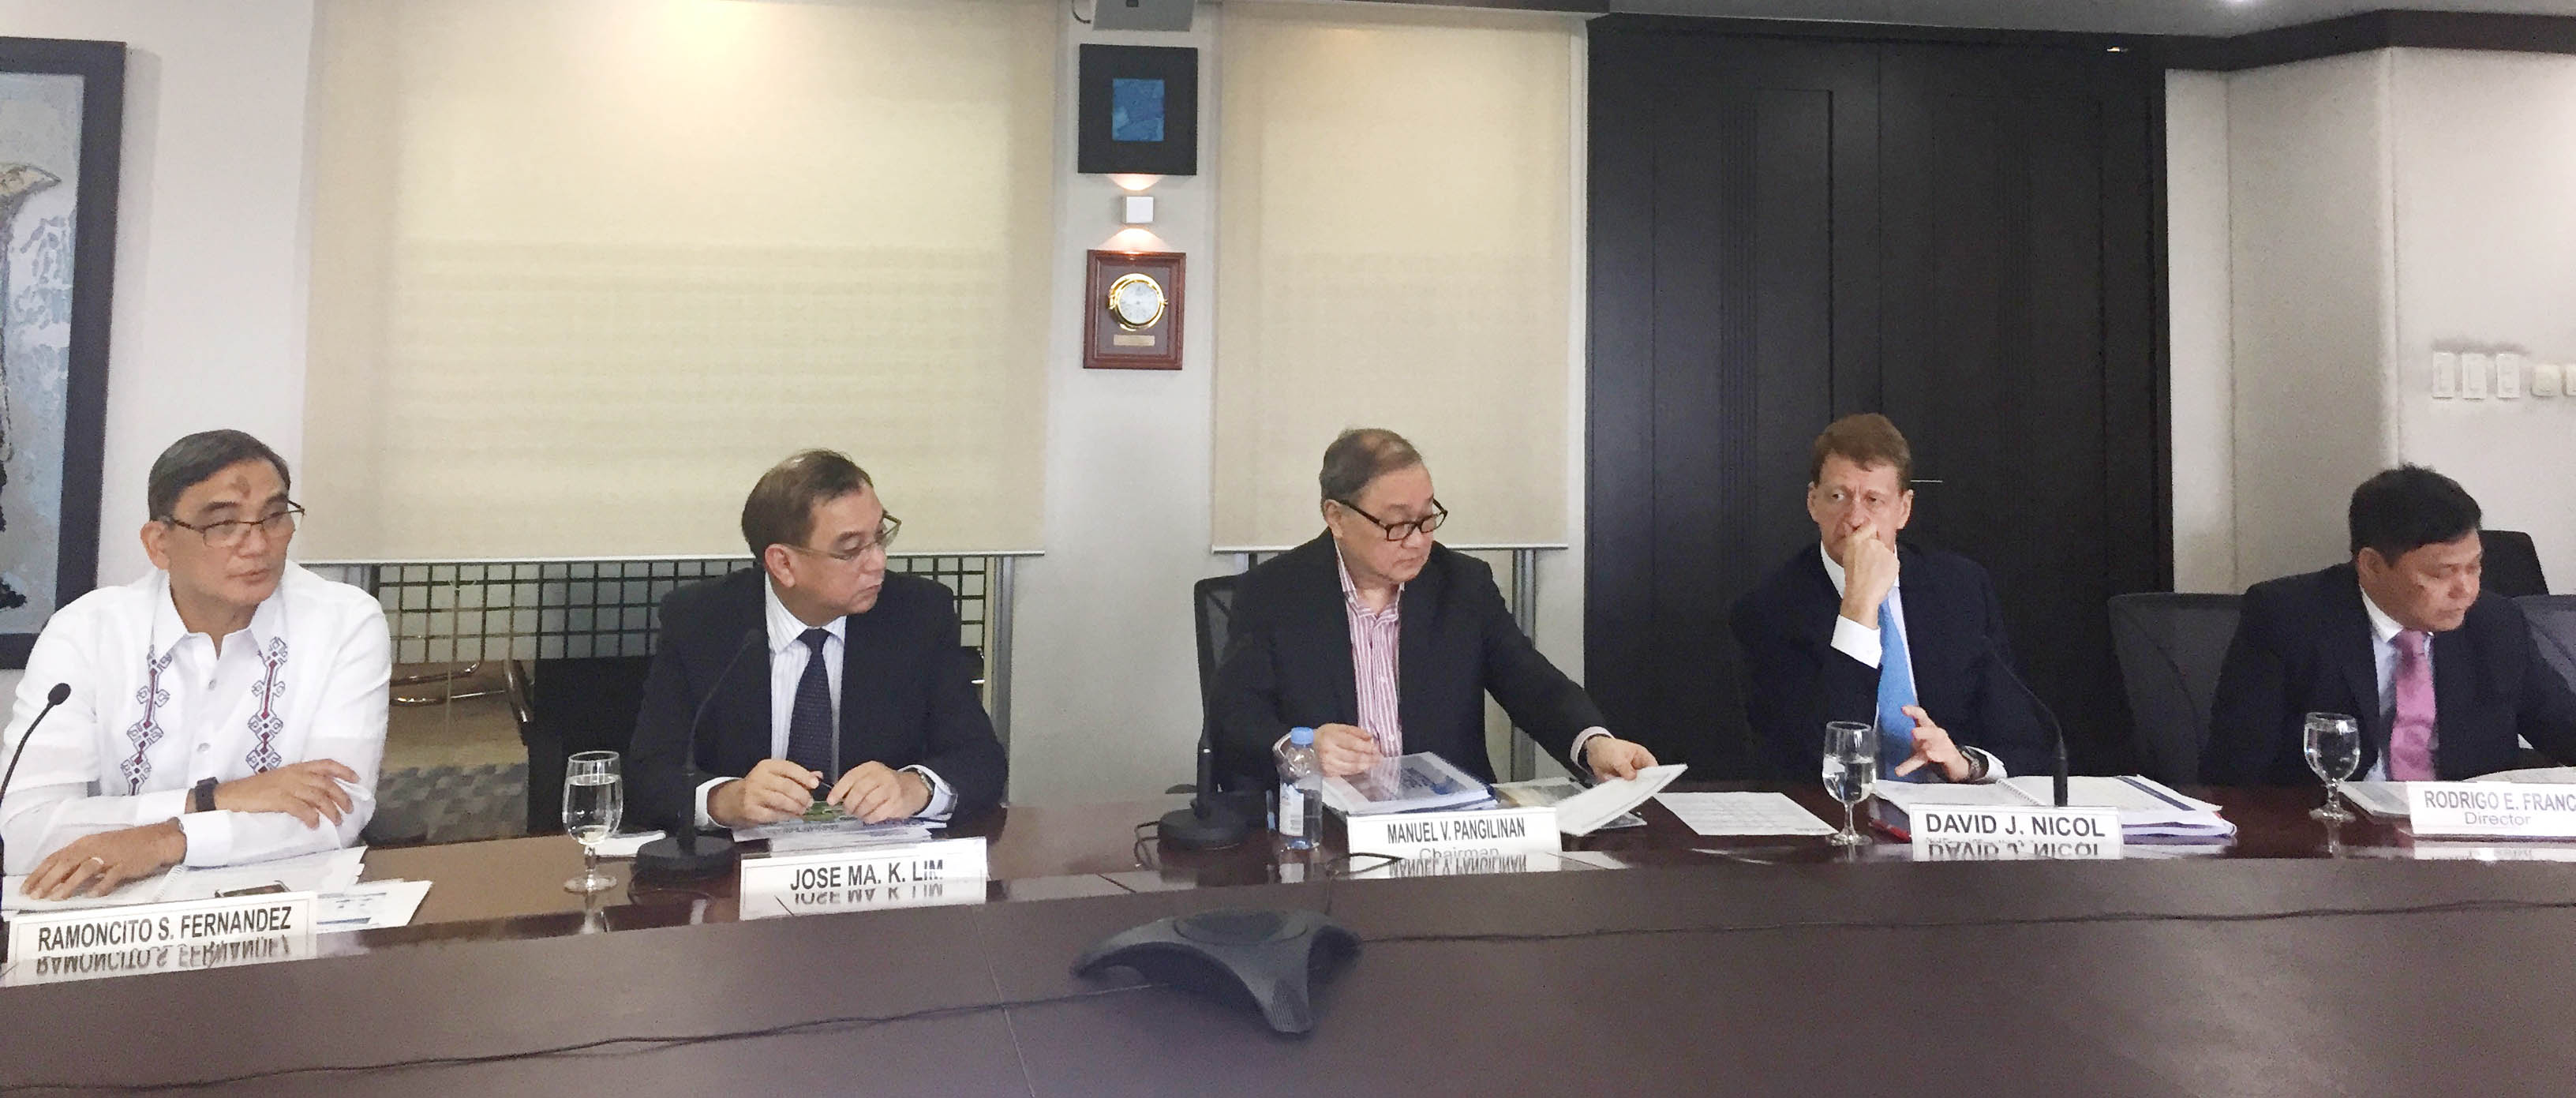 SUSTAINING GROWTH. MPIC's double-digit growth in its net income was sustained despite a cumulative foregone revenue of P14.5 billion so far from the overdue tariff and toll hike adjustments. In the photo are (L-R) Maynilad's Ramoncito Fernandez, MPIC president Jose Ma. Lim, MPIC chairman Manuel V. Pangilinan, MPIC CFO David Nicol, and MPTC president Rodrigo Franco. Photo by Chrisee Dela Paz/Rappler  